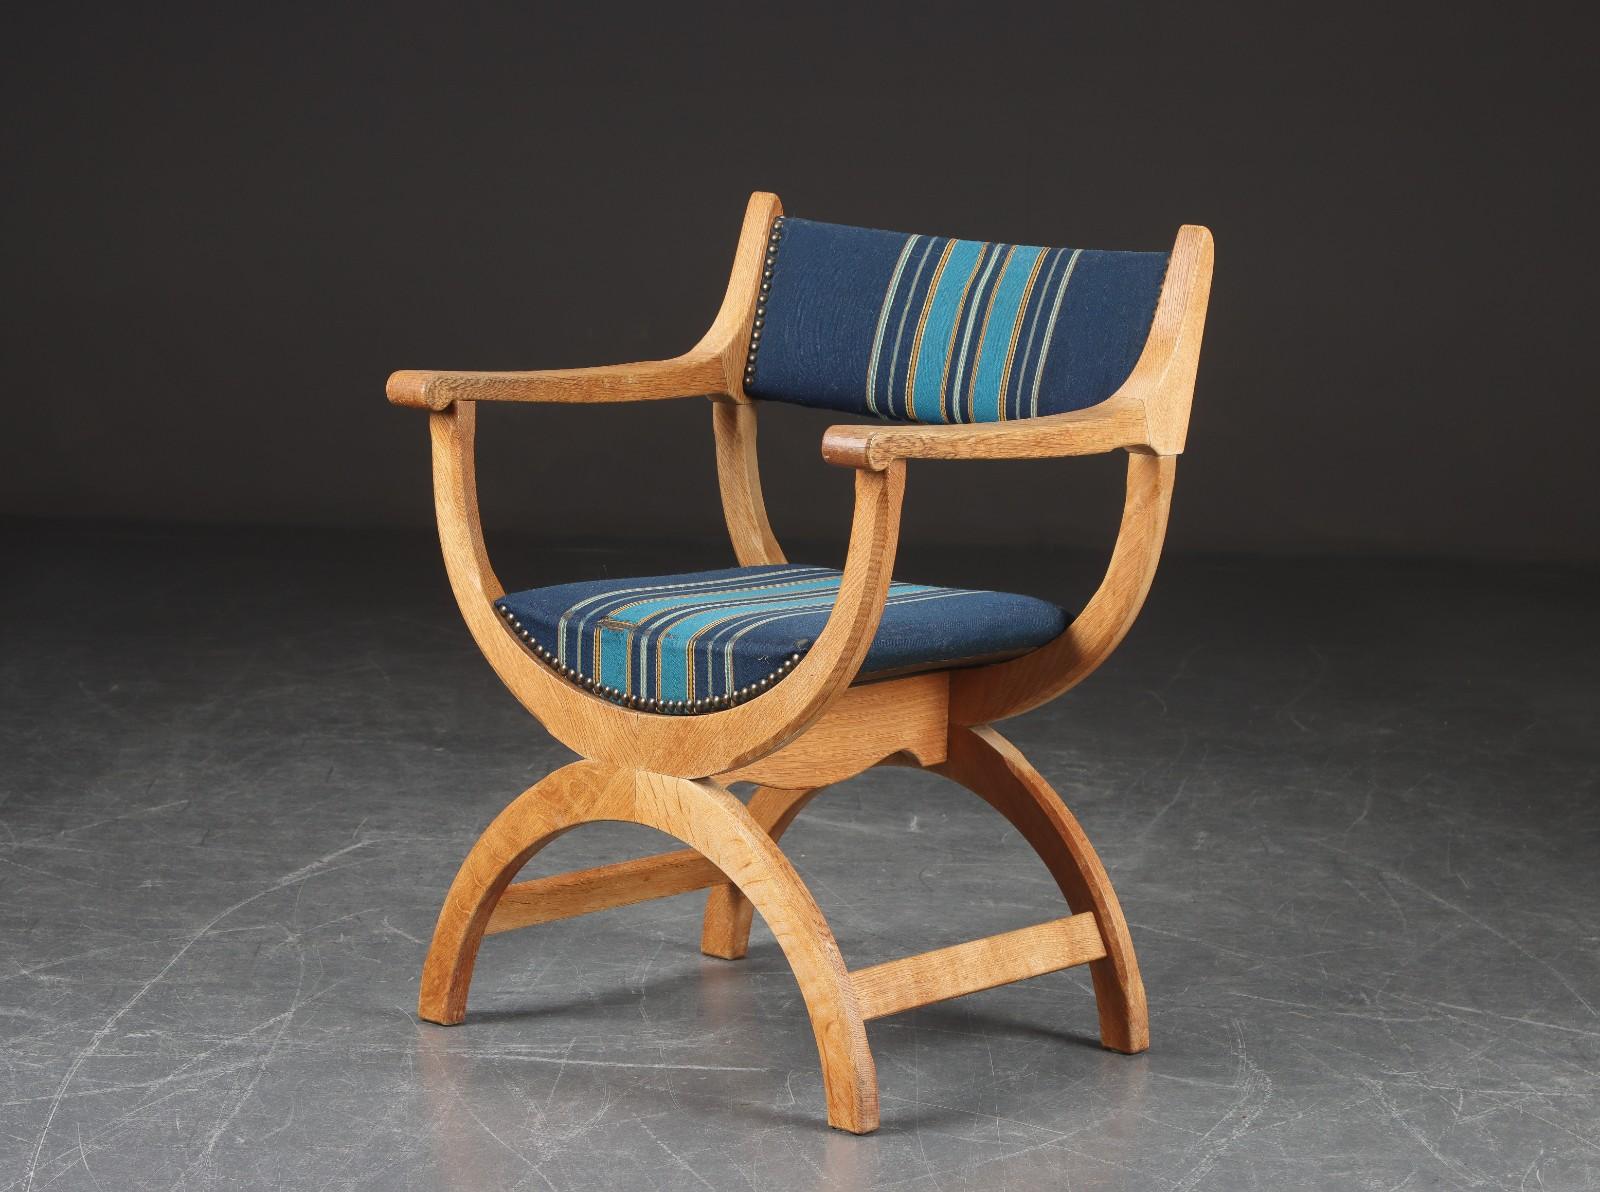 Designed by Henning Kjaernulf, this so-called “kurulstol” or kurul chair, is an iconic model by Danish designer, Henning Kjærnulf. The Kurul chair is an ancient folding chair, originally a folding stool with straight or curved legs. Among the